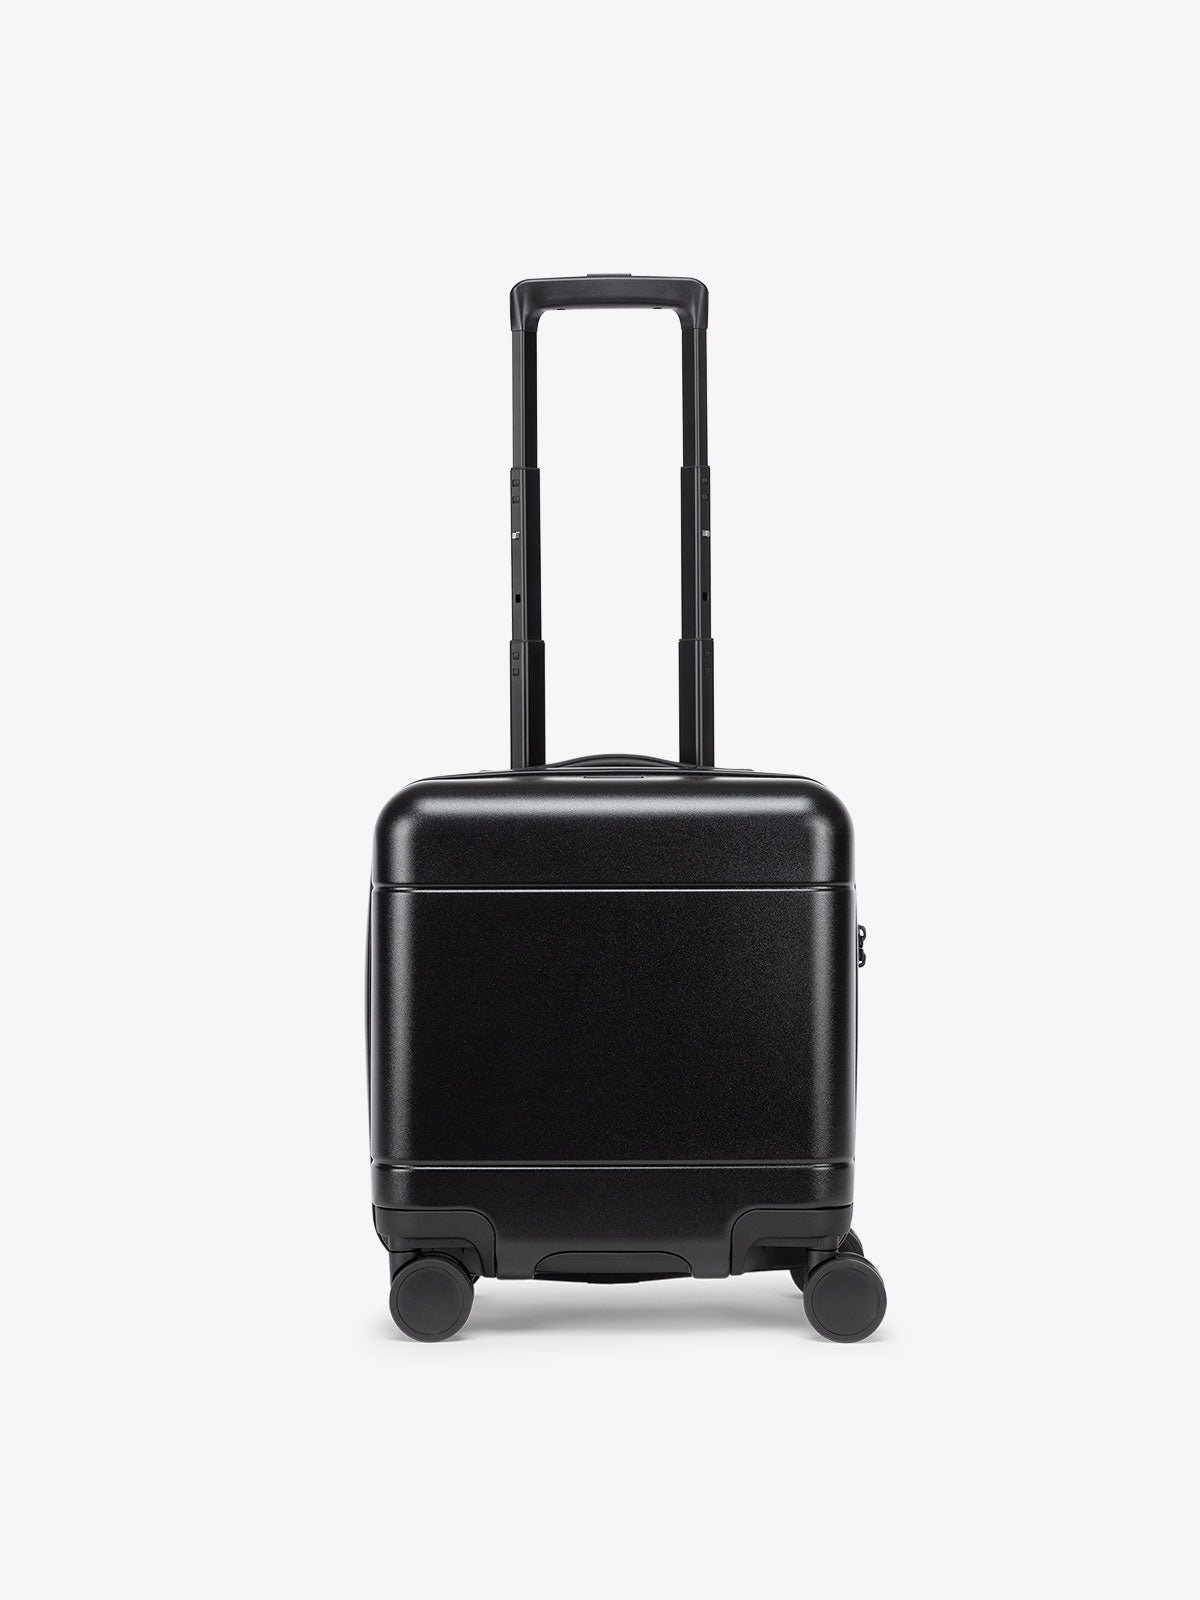 Hue mini carry on luggage in black